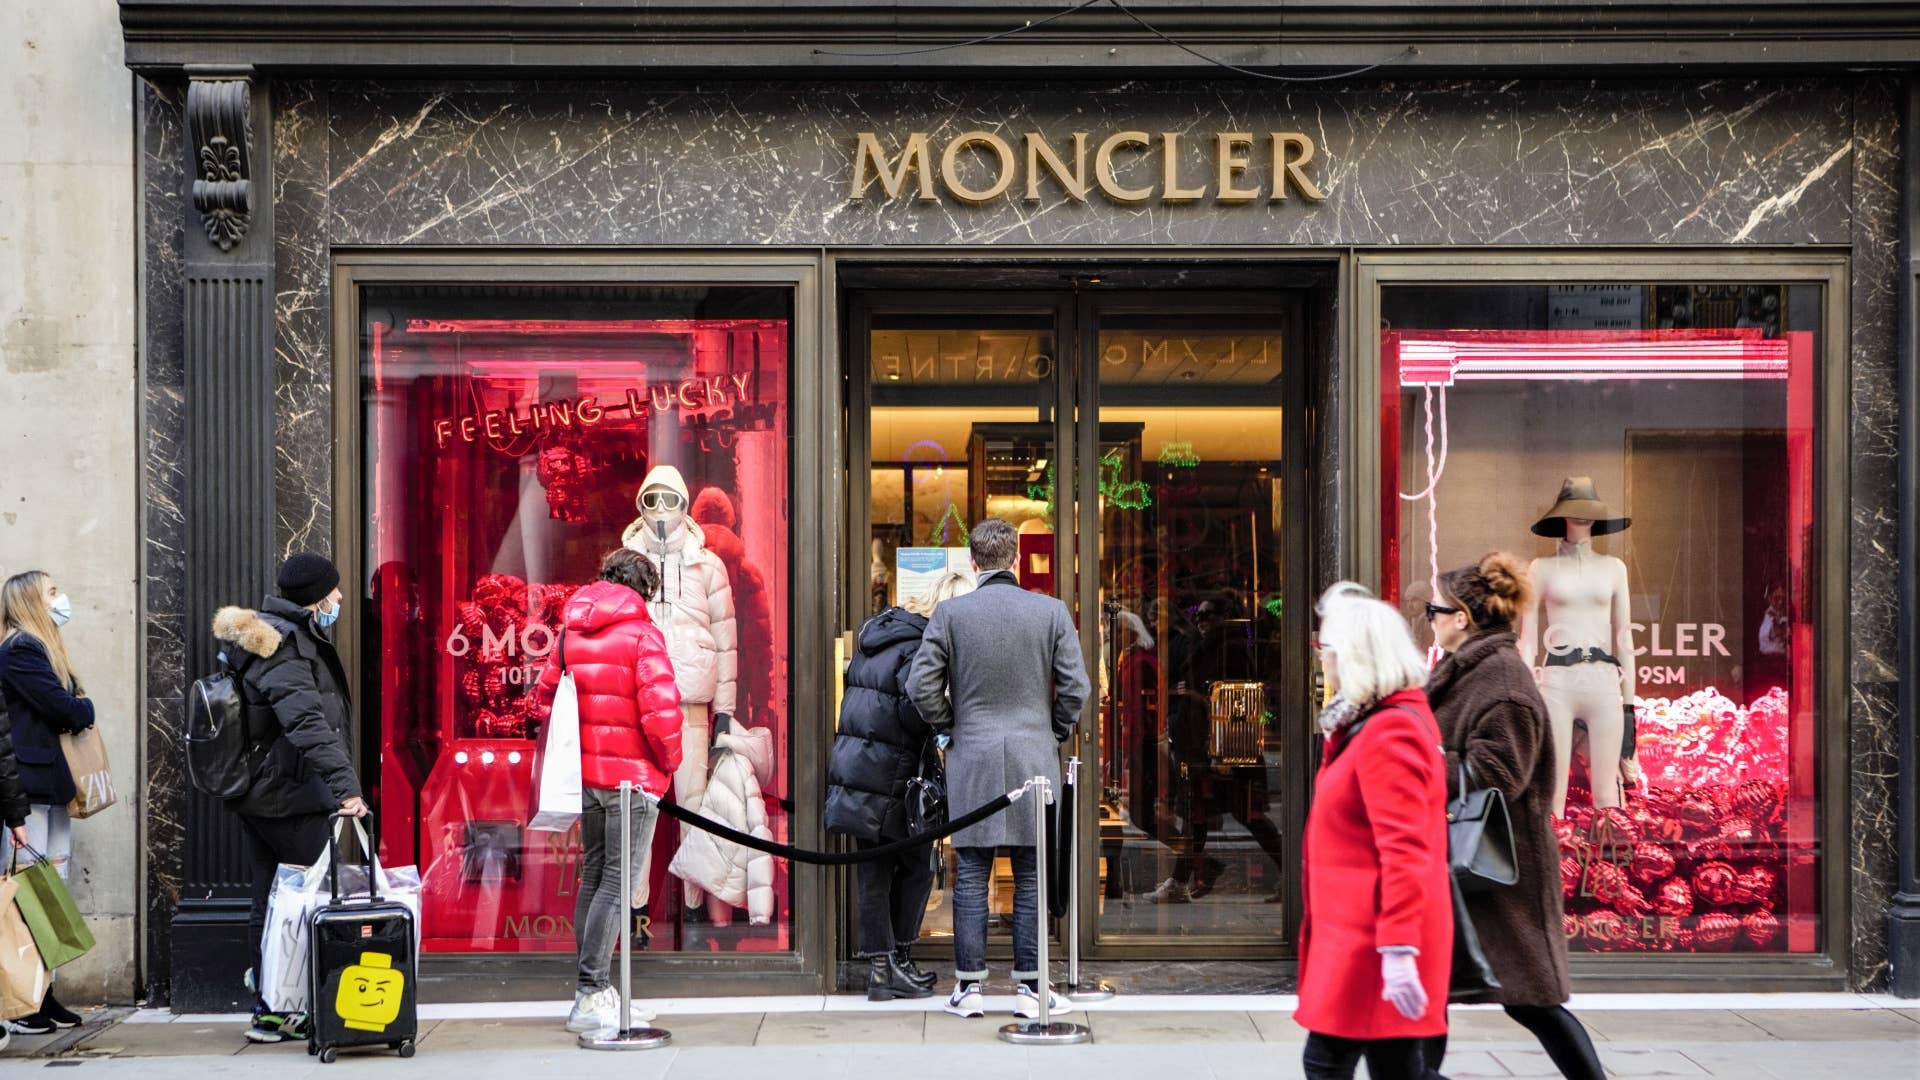 Moncler Acquires Stone Island in Deal Reportedly Worth $1.4 Billion